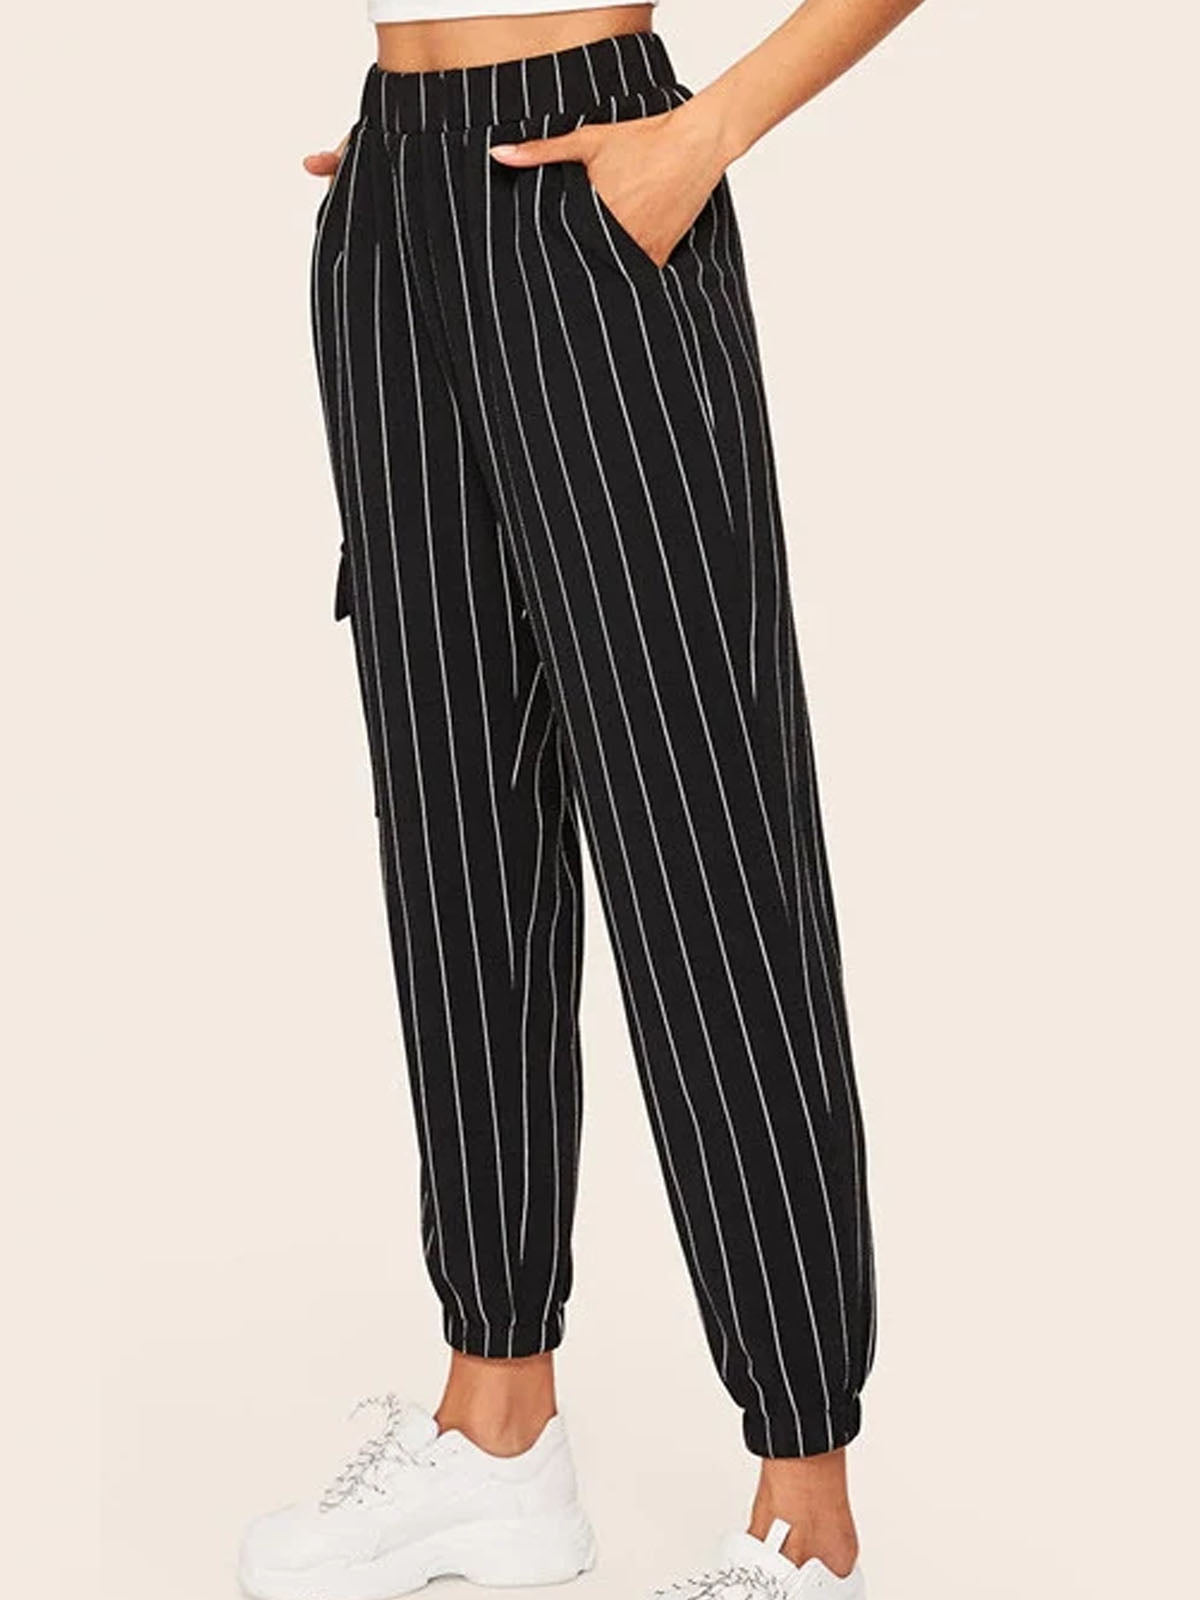 Women's Vertical Striped  Casual Pants